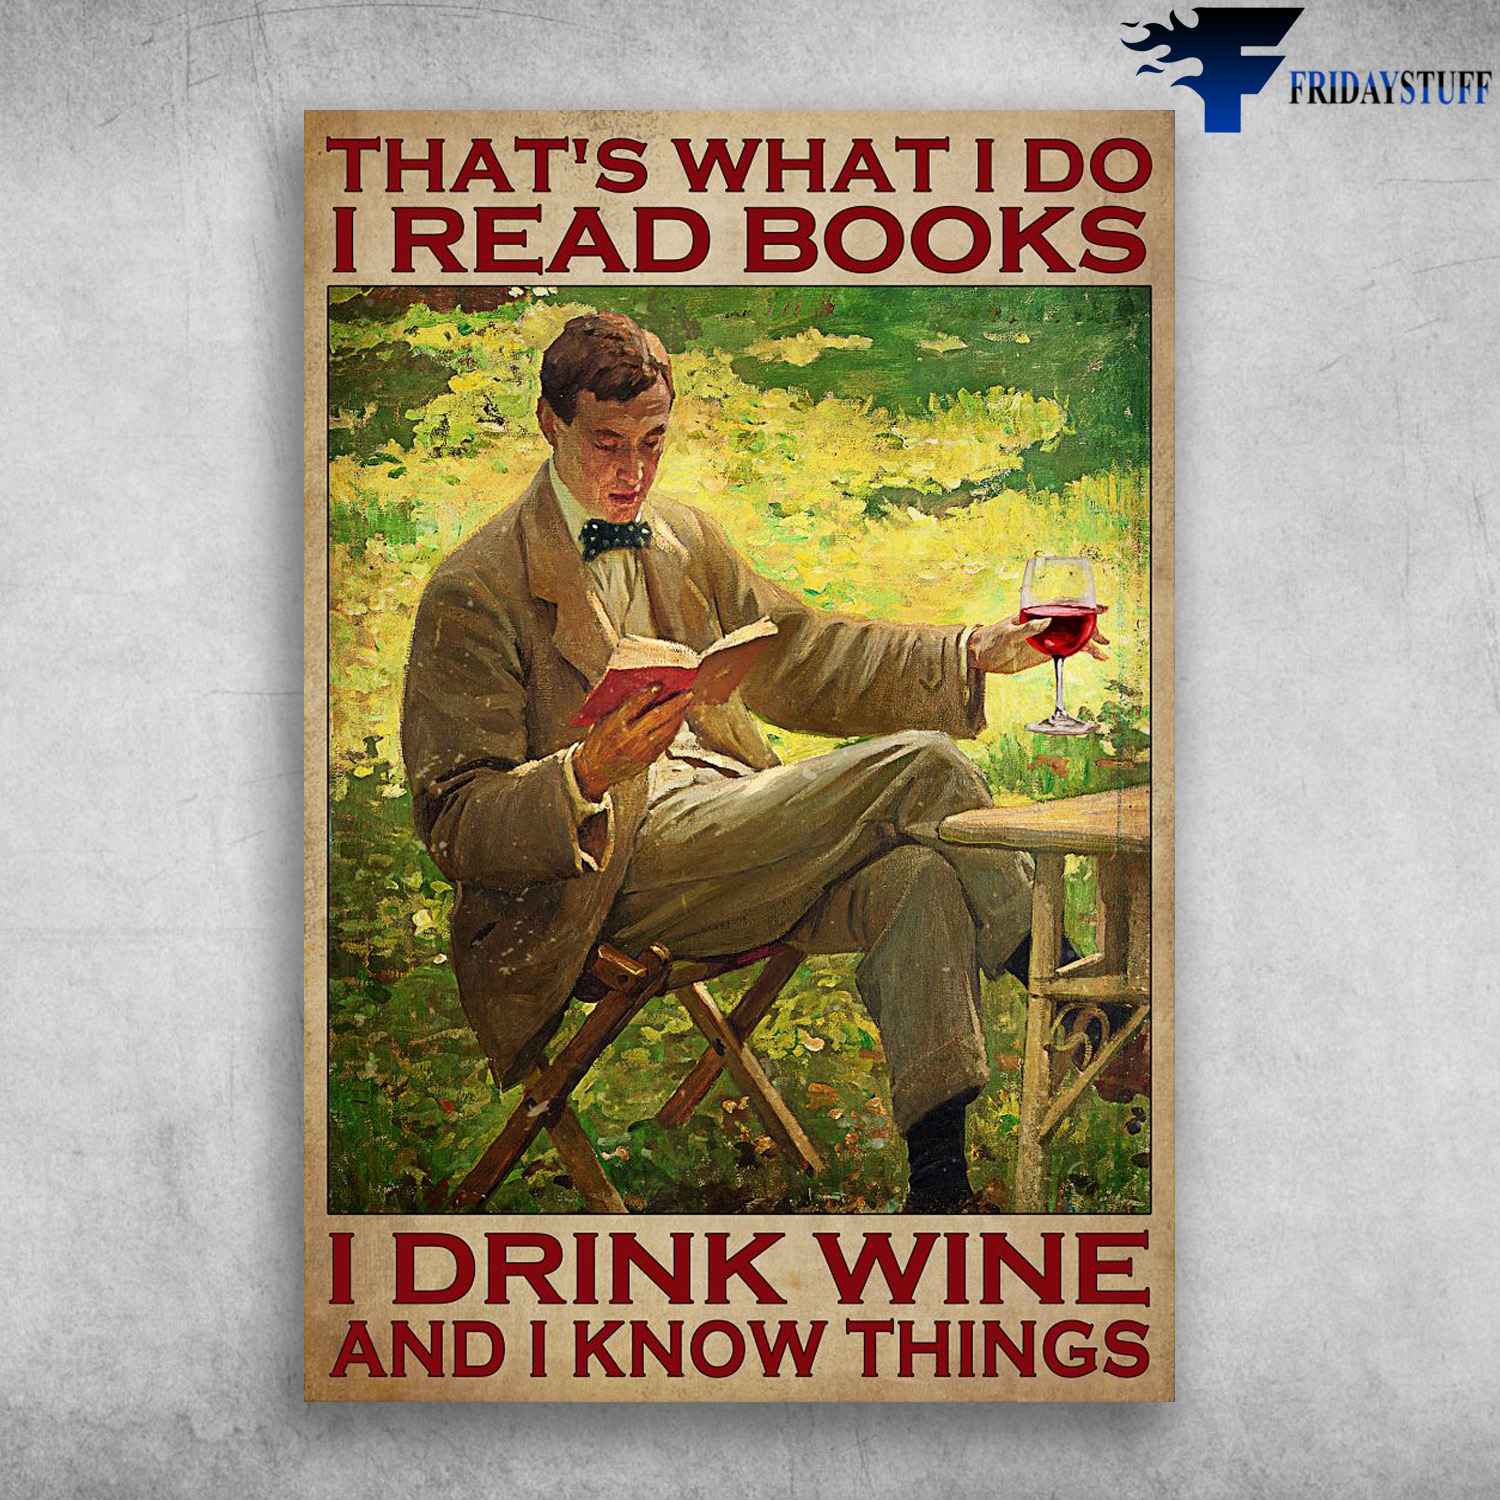 Man Drinks Wine And Reads Book - That's What I Do, I Read Books, I Drink Wine And I Know Things, Gentleman Drinking